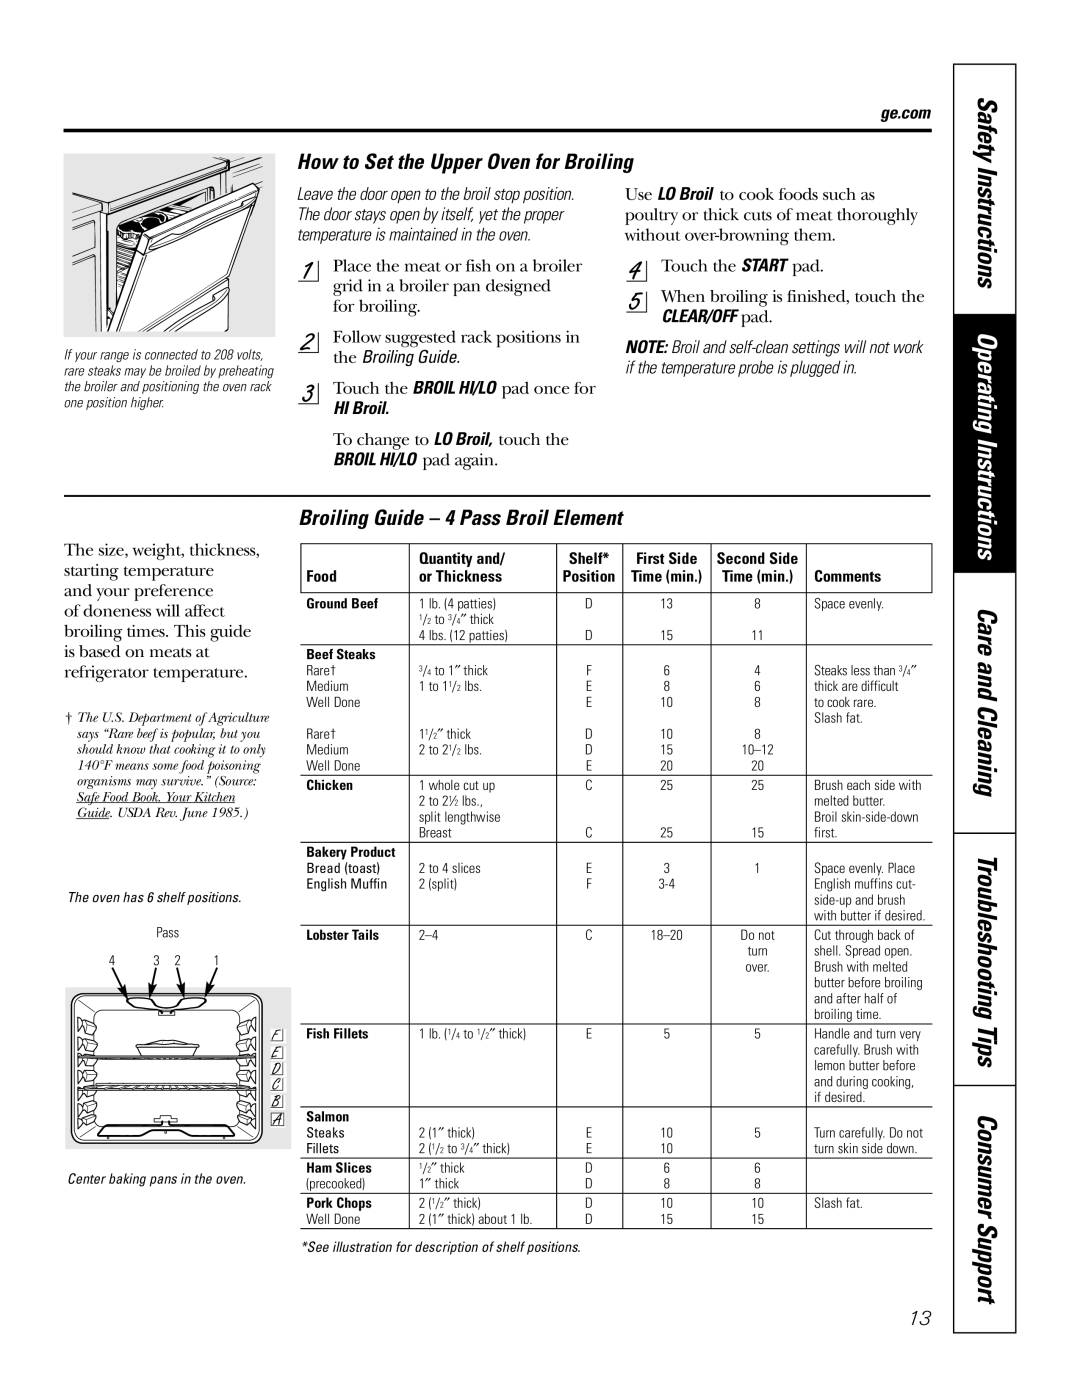 GE JB690, JB730, JB720 owner manual How to Set the Upper Oven for Broiling, Broiling Guide - 4 Pass Broil Element, Safety 